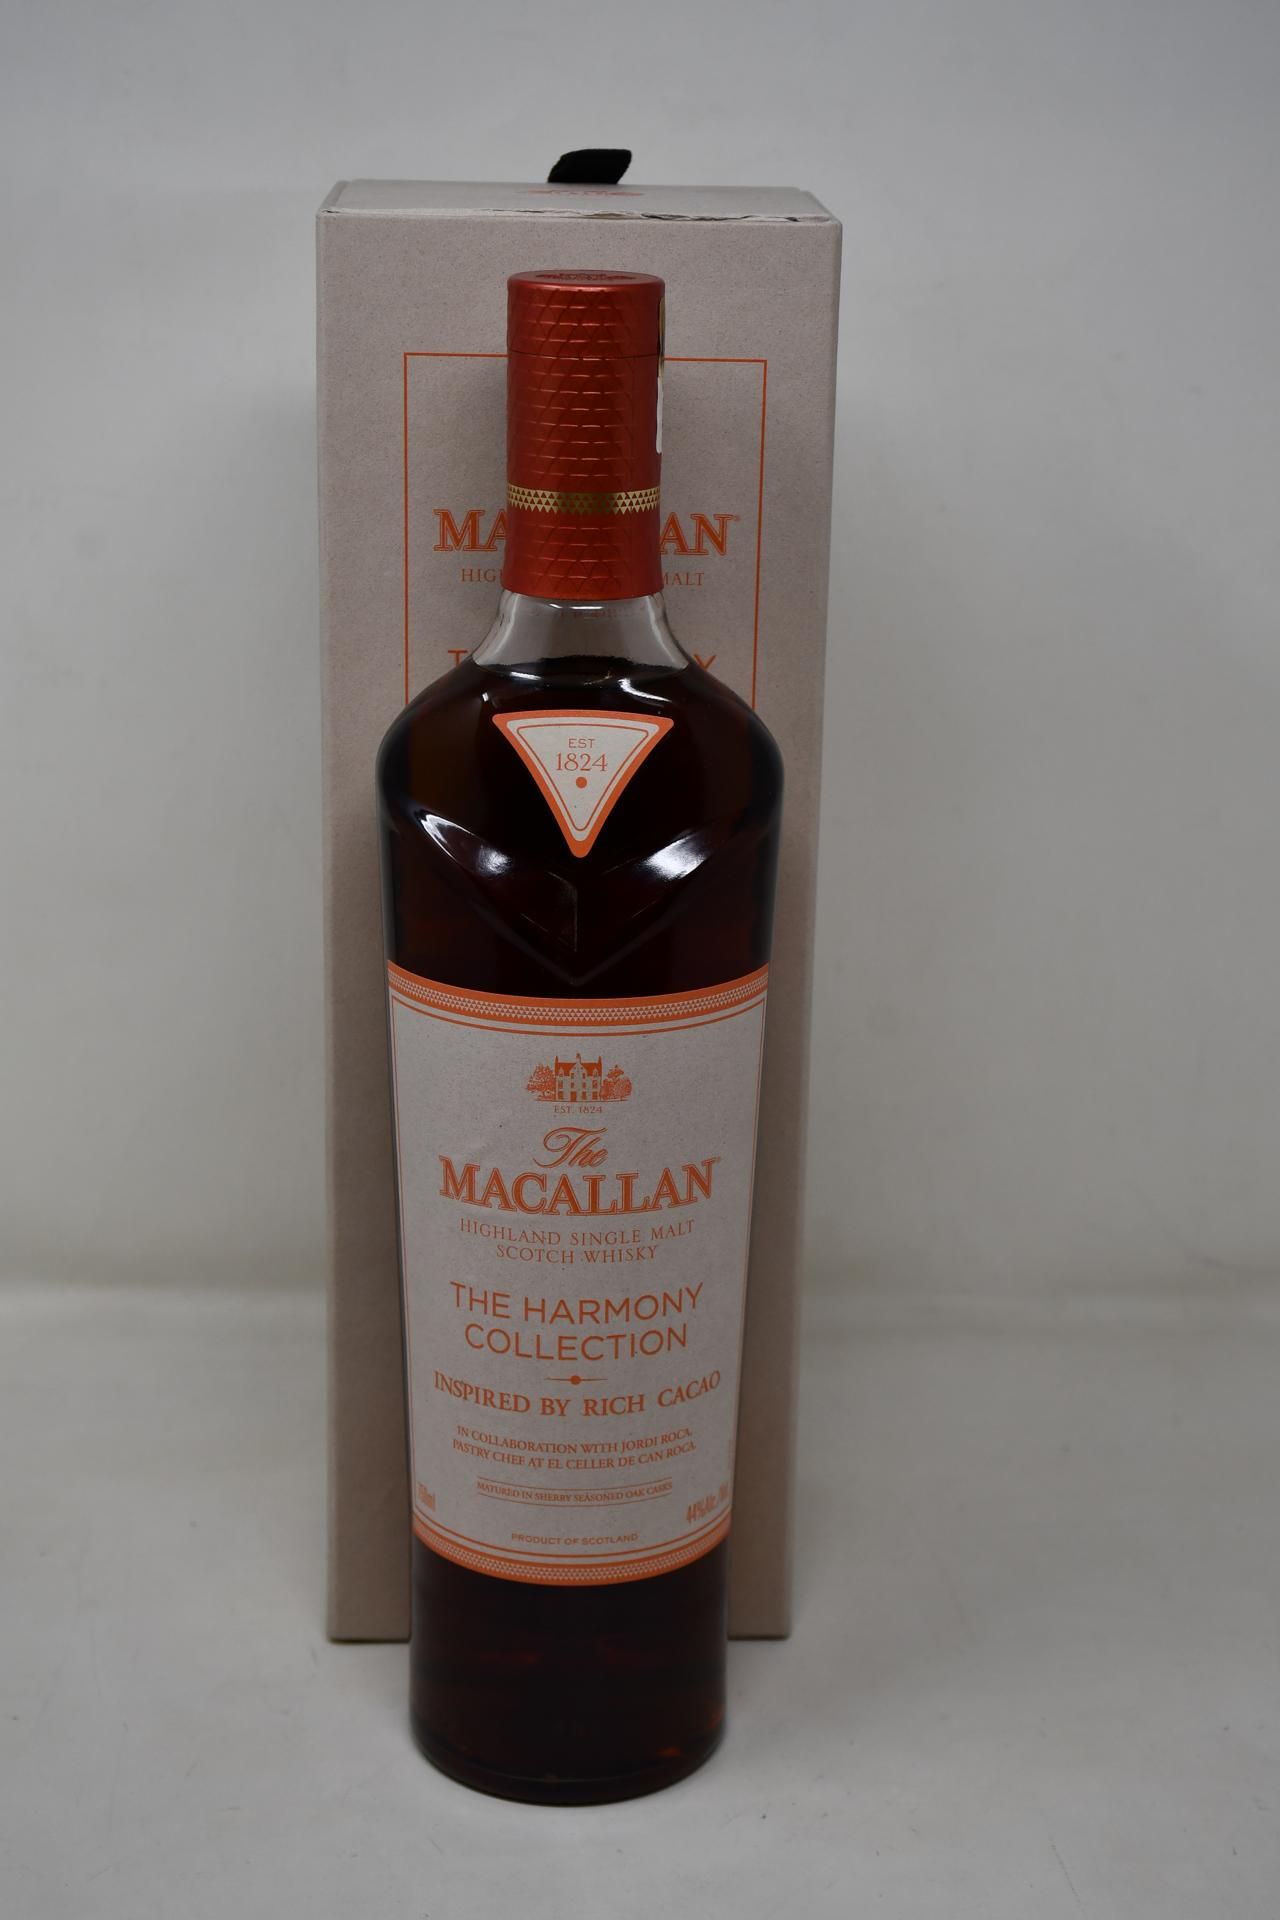 A bottle of The Macallan (The Harmany Collection Rich Cacao) Highland Single Malt Scotch Whiskey (75